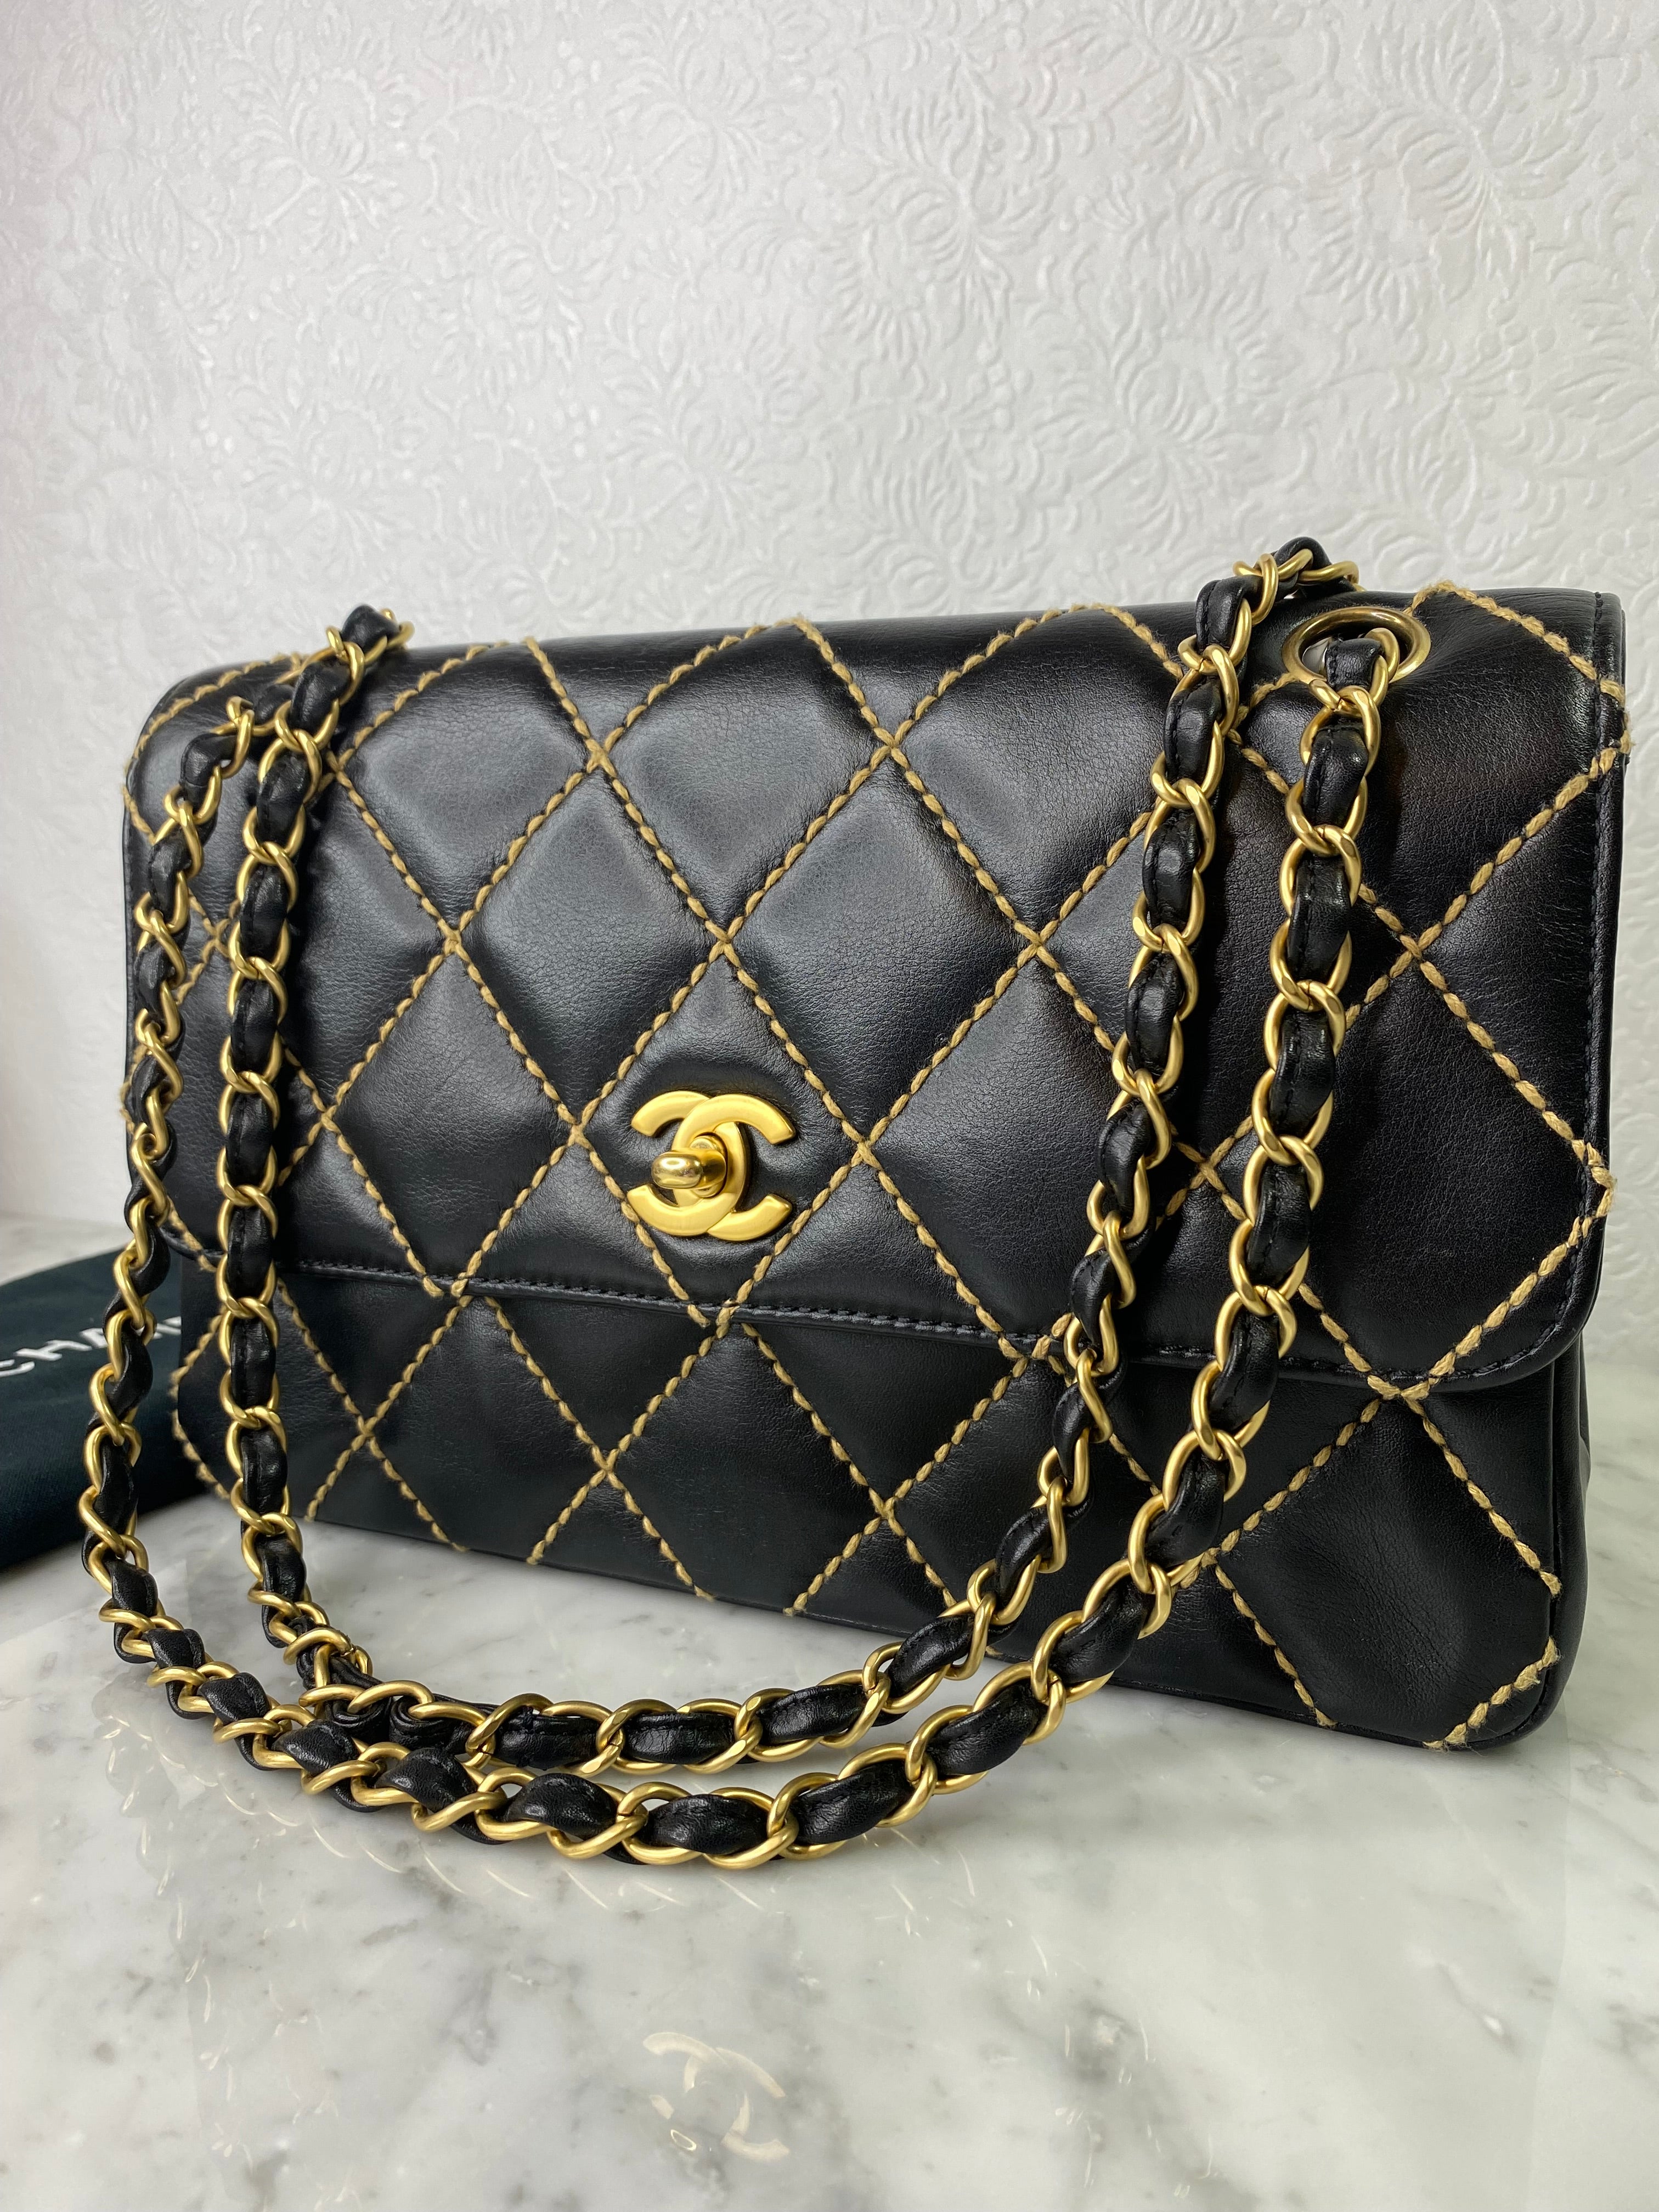 Chanel Black Quilted Lambskin Wild Stitch Flap Bag